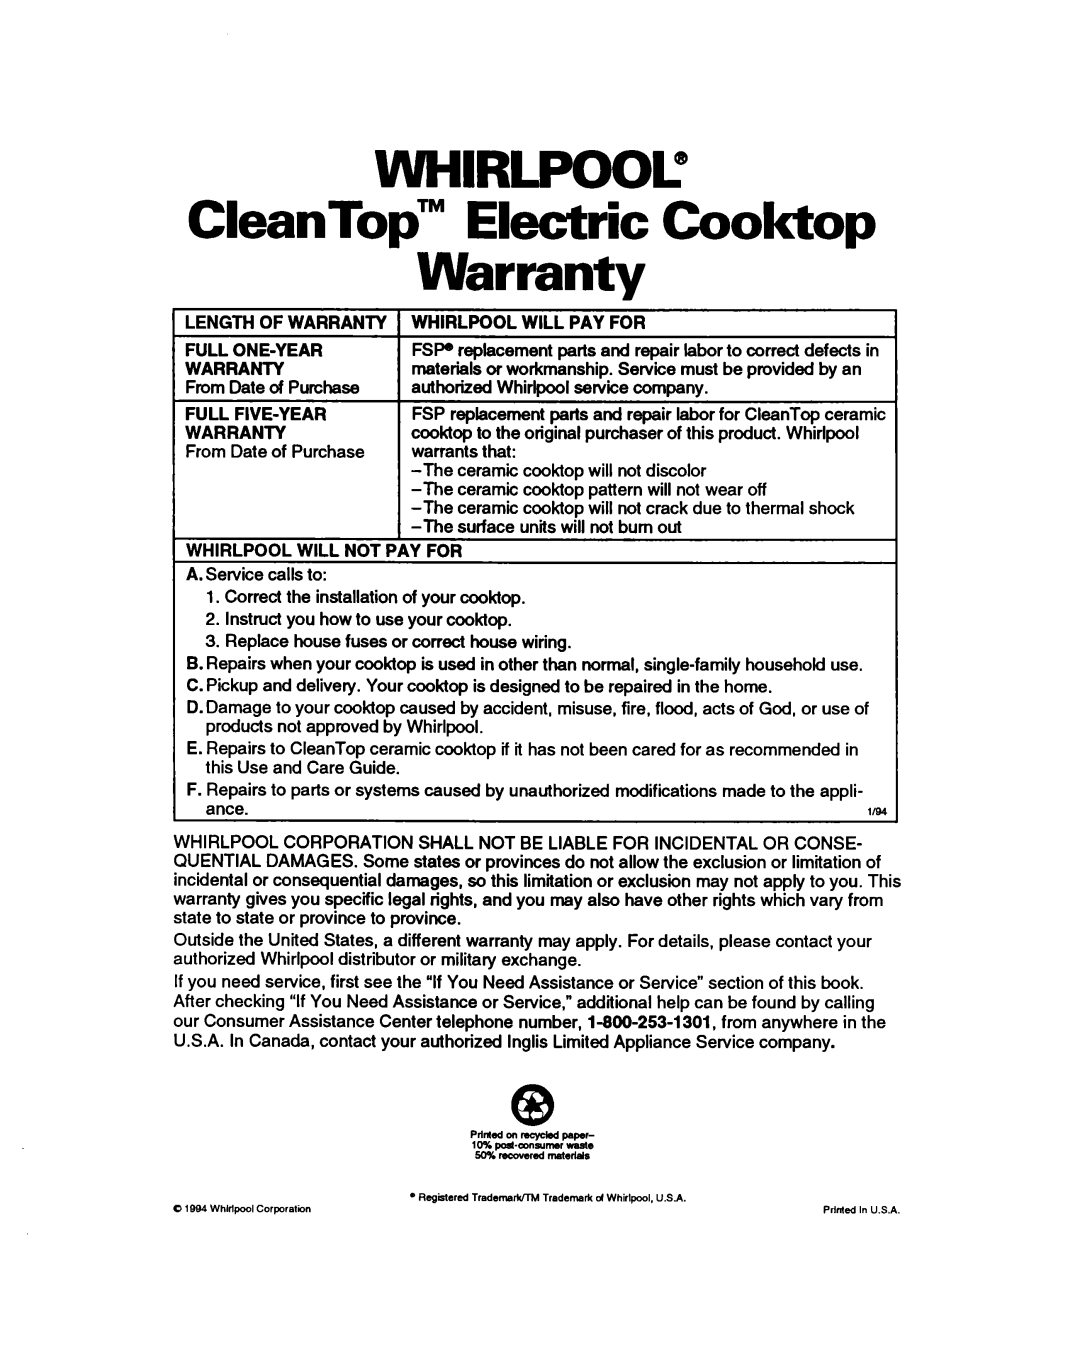 Whirlpool RC864OXB WHIRLPOOL@’ CleanTop’” Electric Cooktop Warranty, Length Of Warranty Whirlpool Will Pay For 